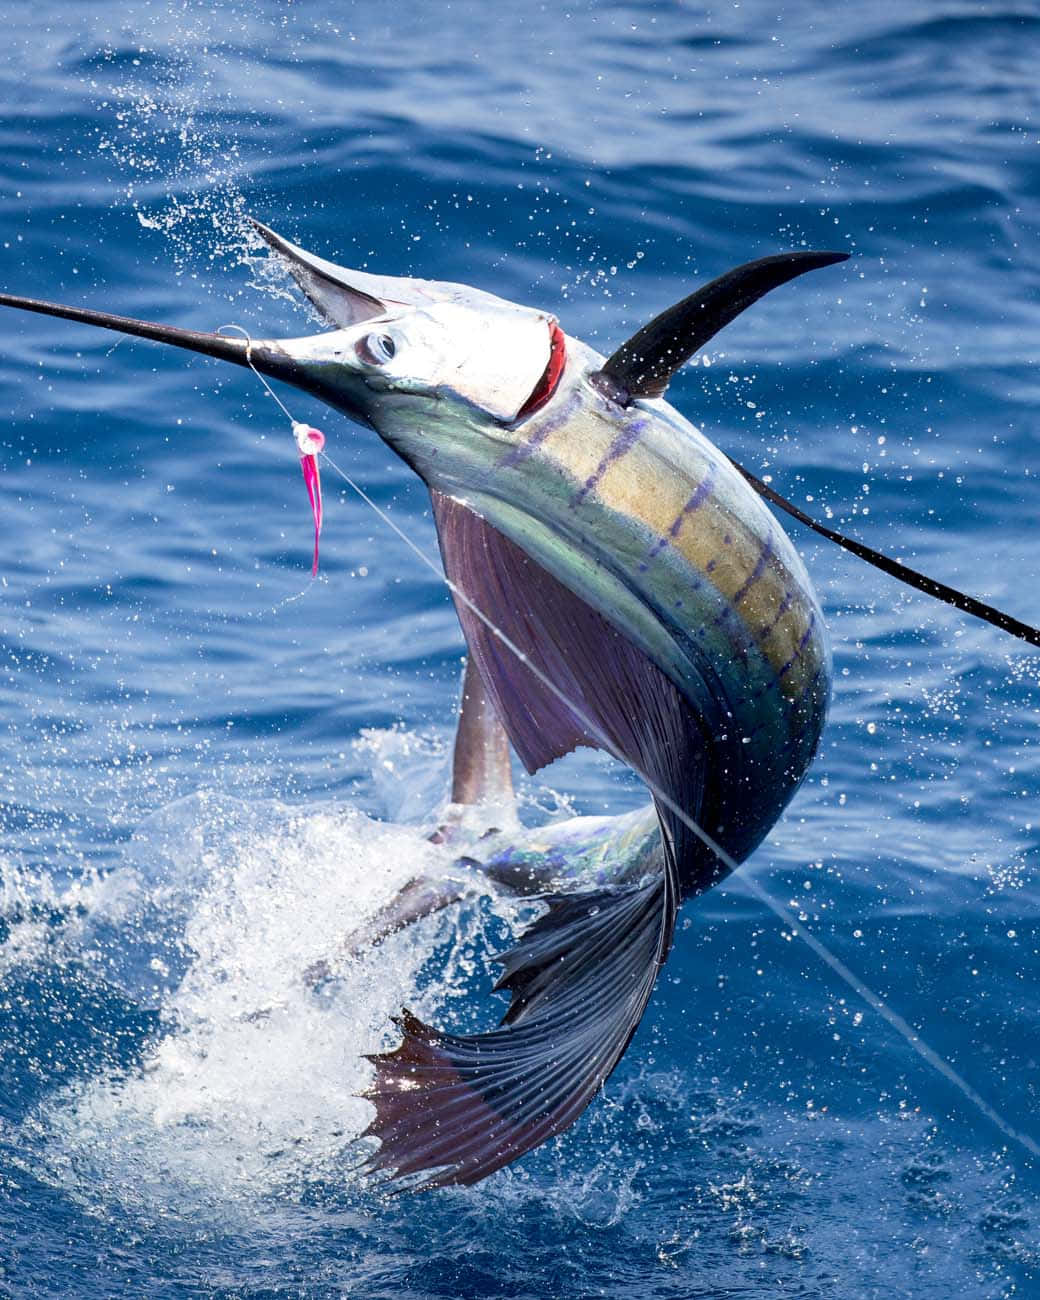 The beautiful sailfish is one of nature’s most graceful creatures.  Greet the day with a graceful swim. Description: A majestic sailfish leaps through the air in an effortless show of strength and beauty. Related Keywords: Sailfish, ocean, seascape, jump, majestic, strength, beauty, grace, nature.